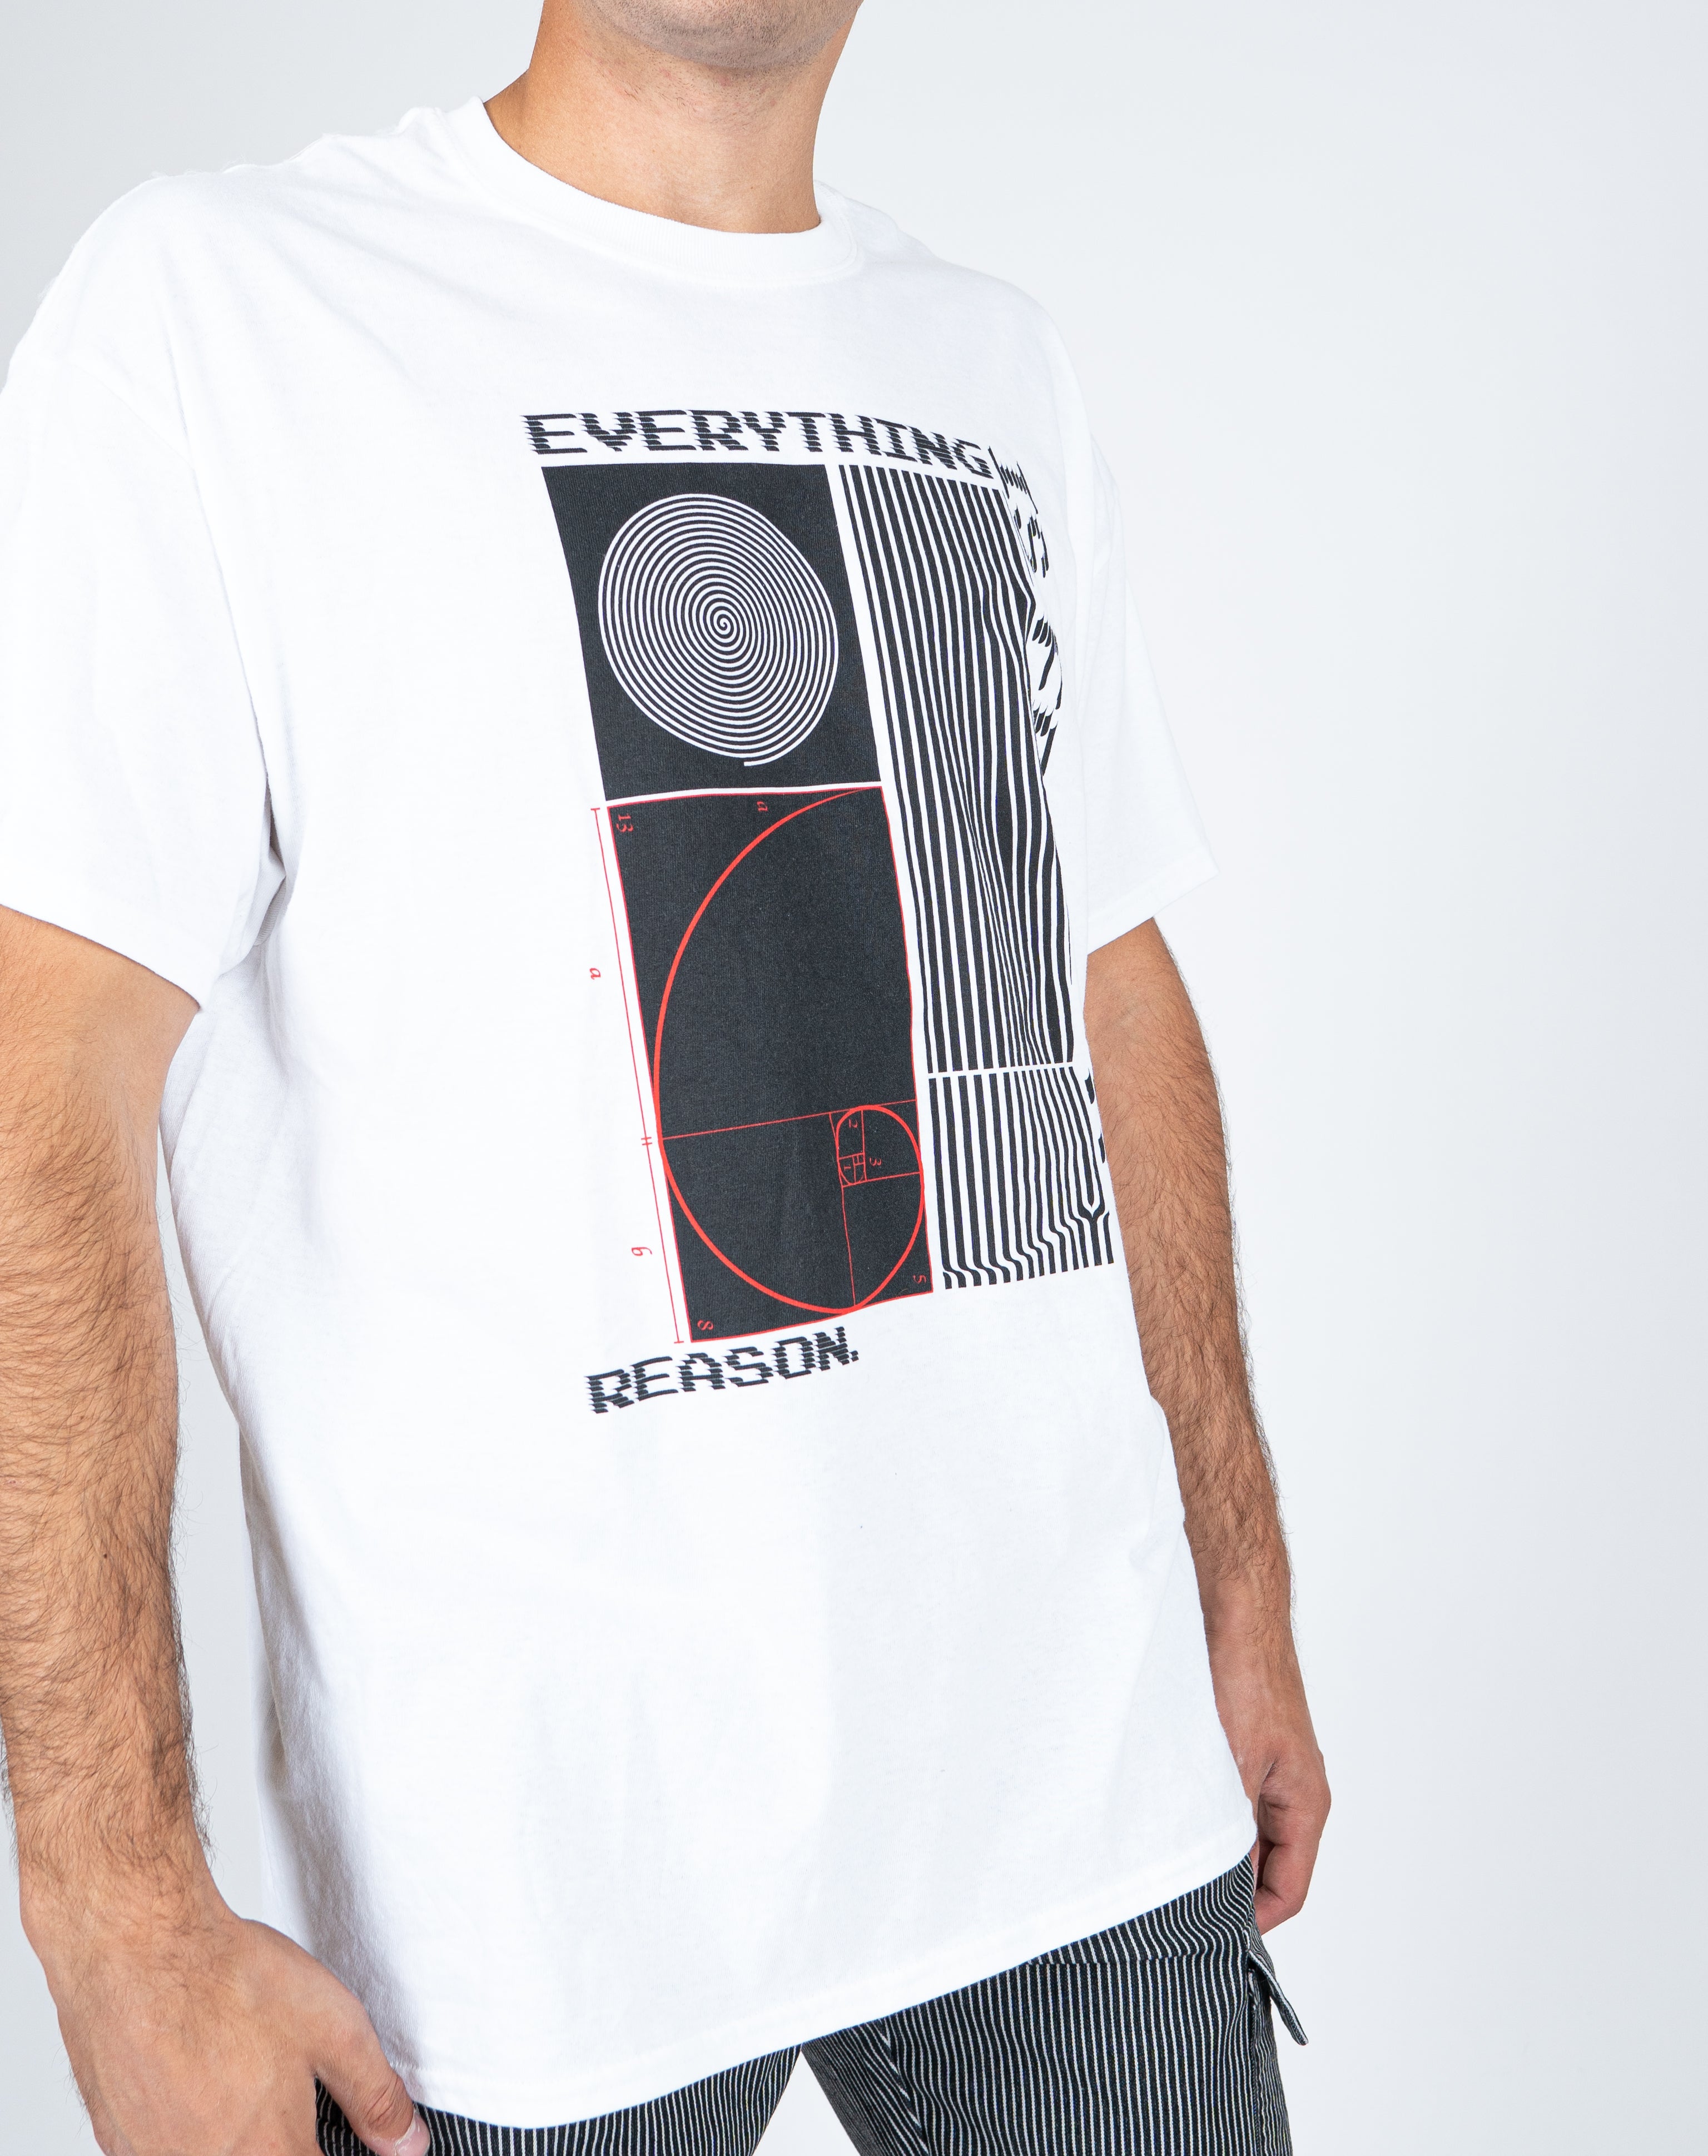 'EVERYTHING HAPPENS FOR A REASON' Printed White T-Shirt